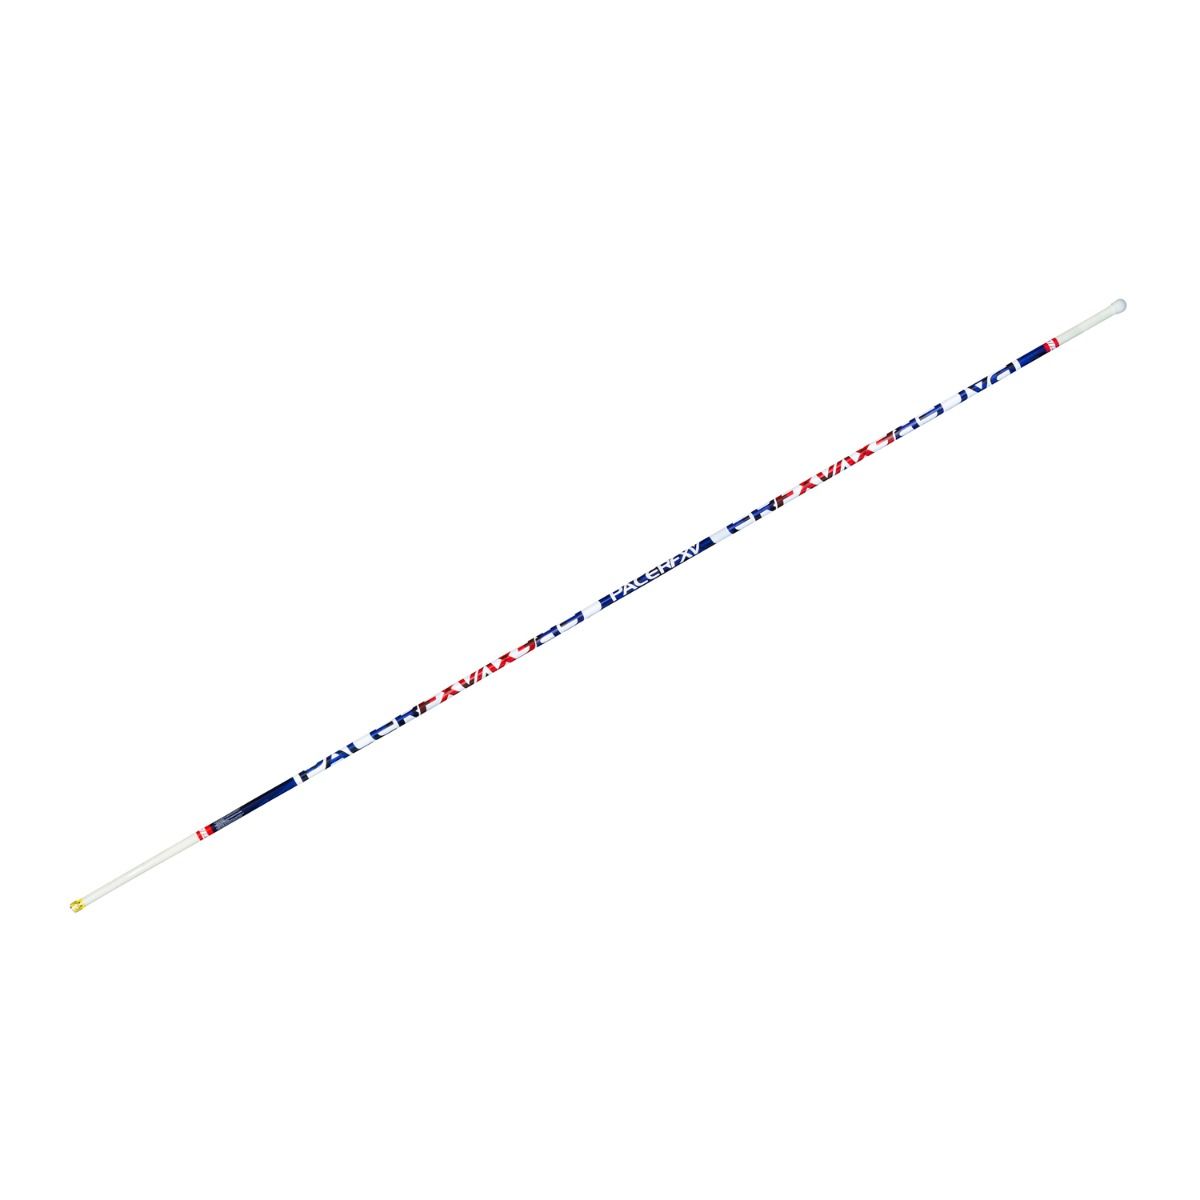 Gill PacerFXV 16' 1" Vaulting Pole